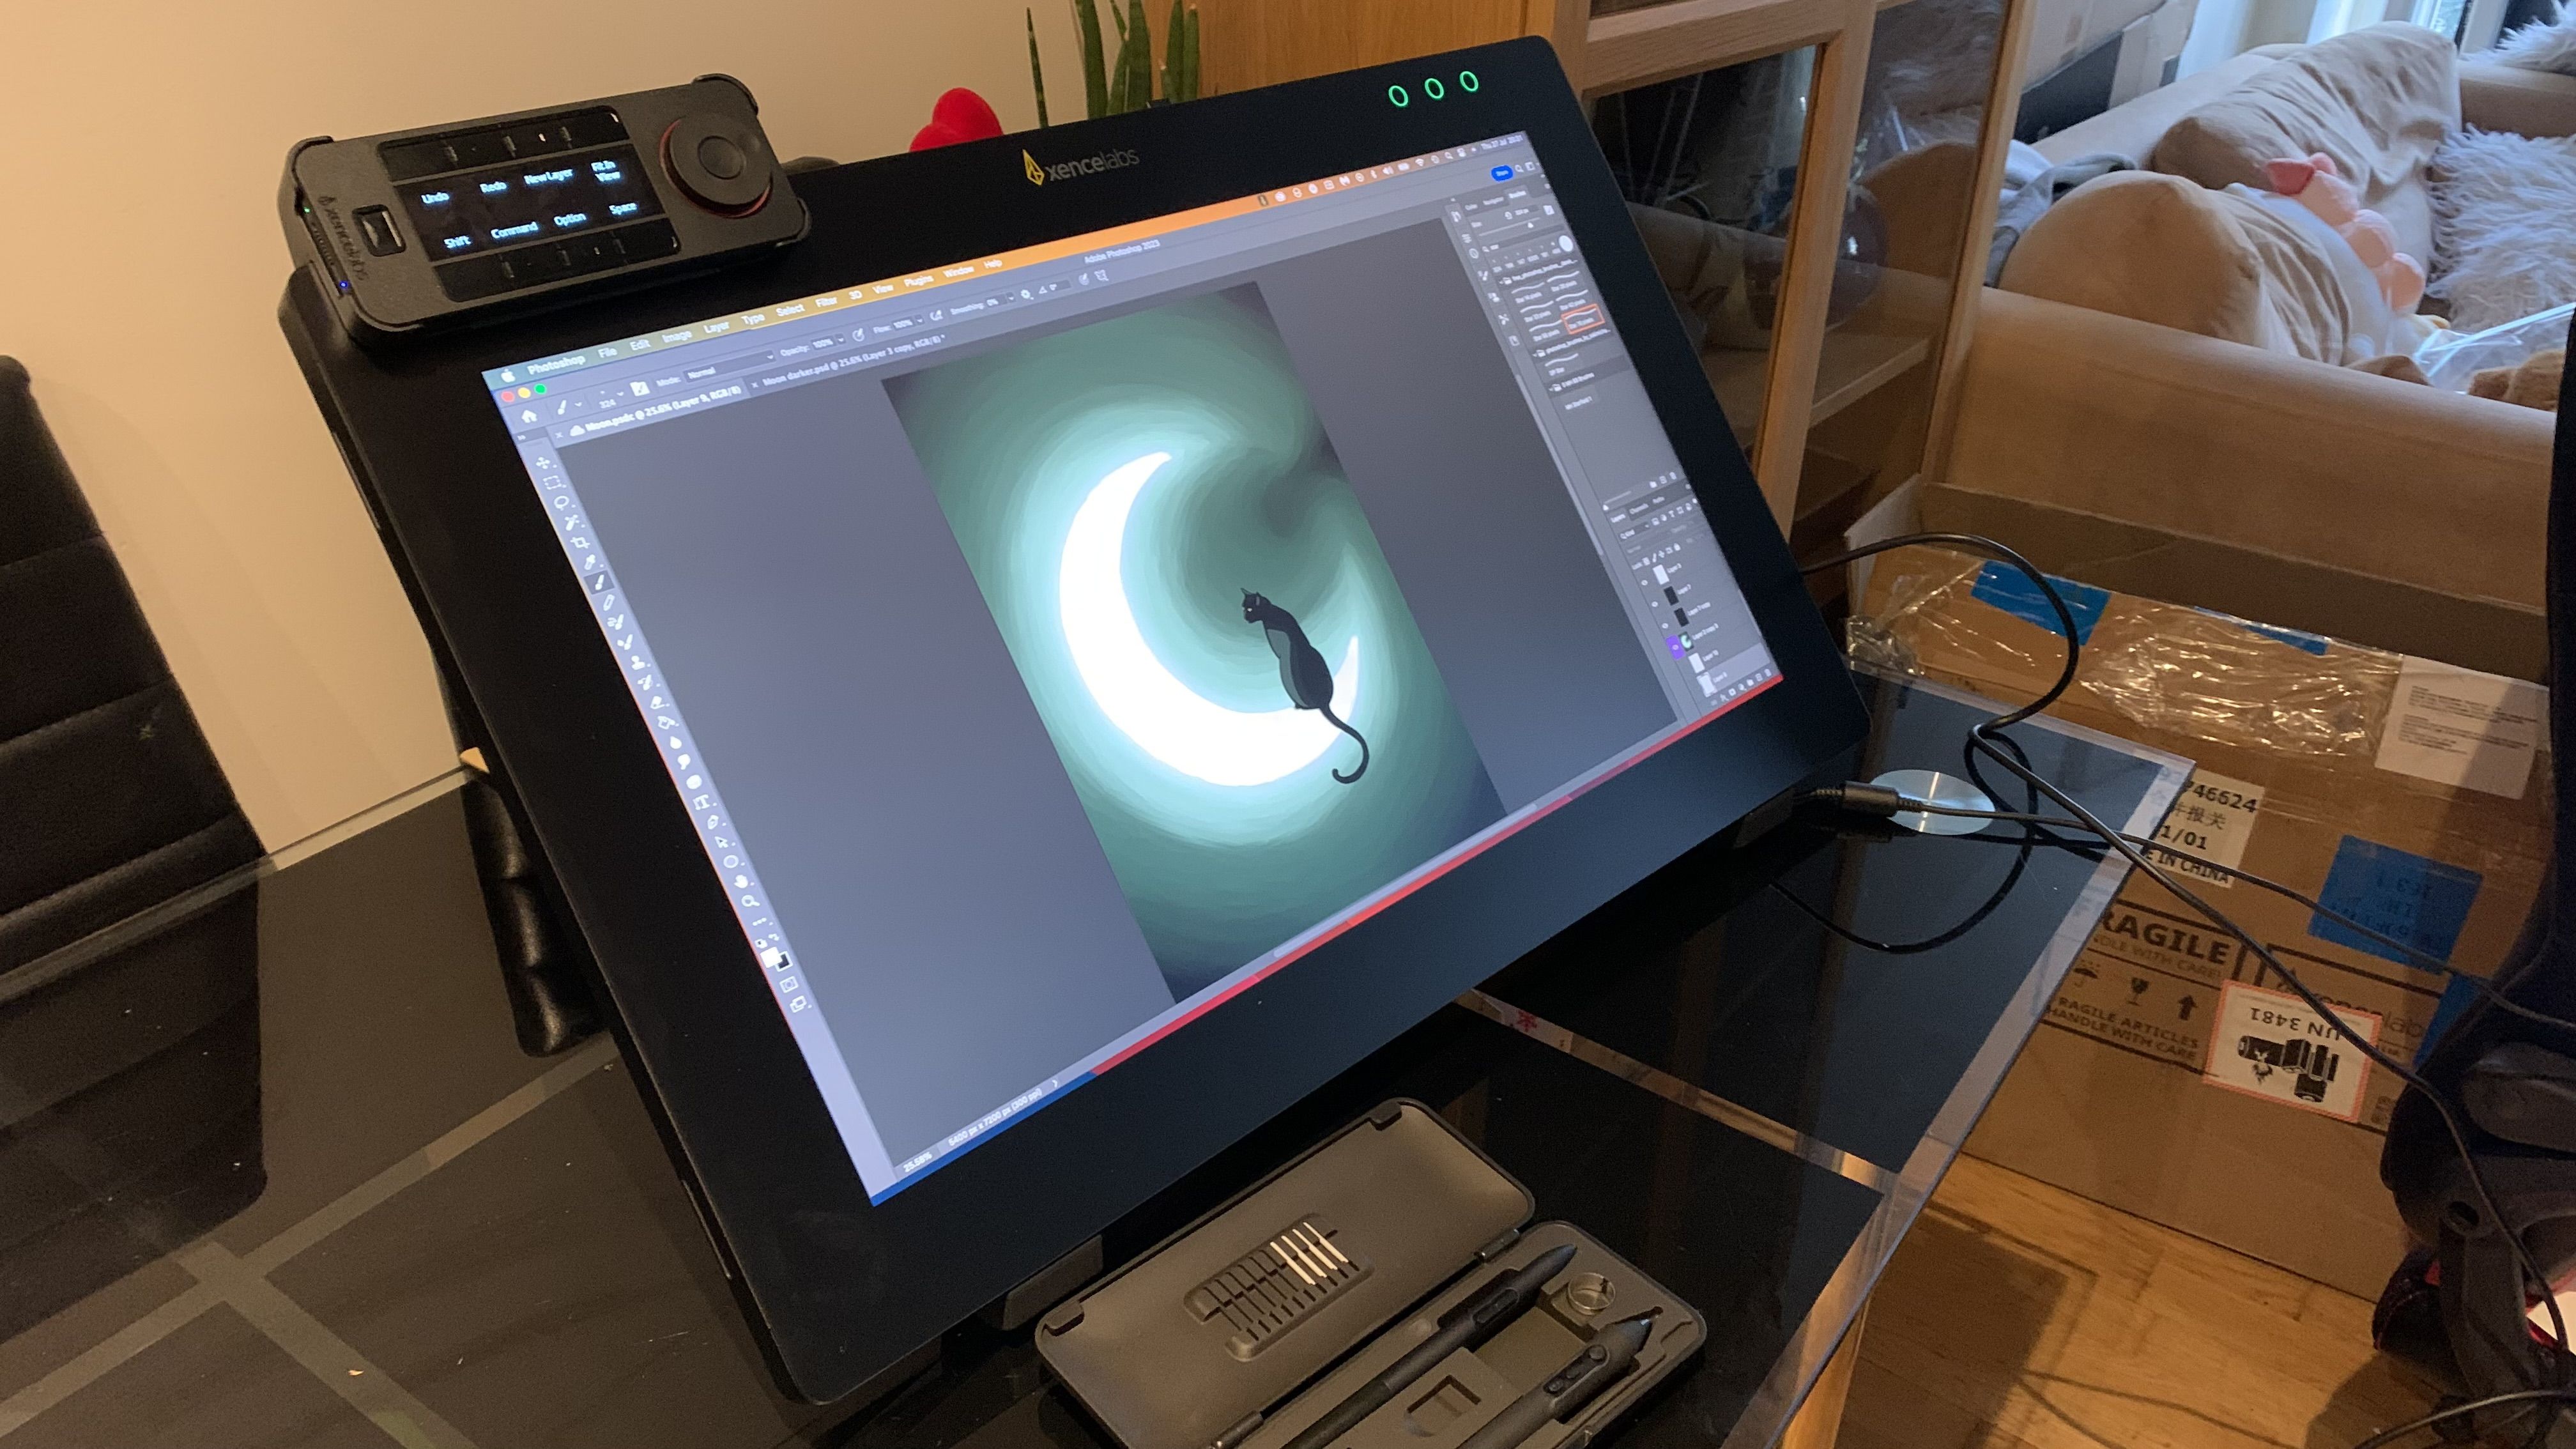 Why I think the new Xencelabs Pen Display 24 is the real Wacom beater